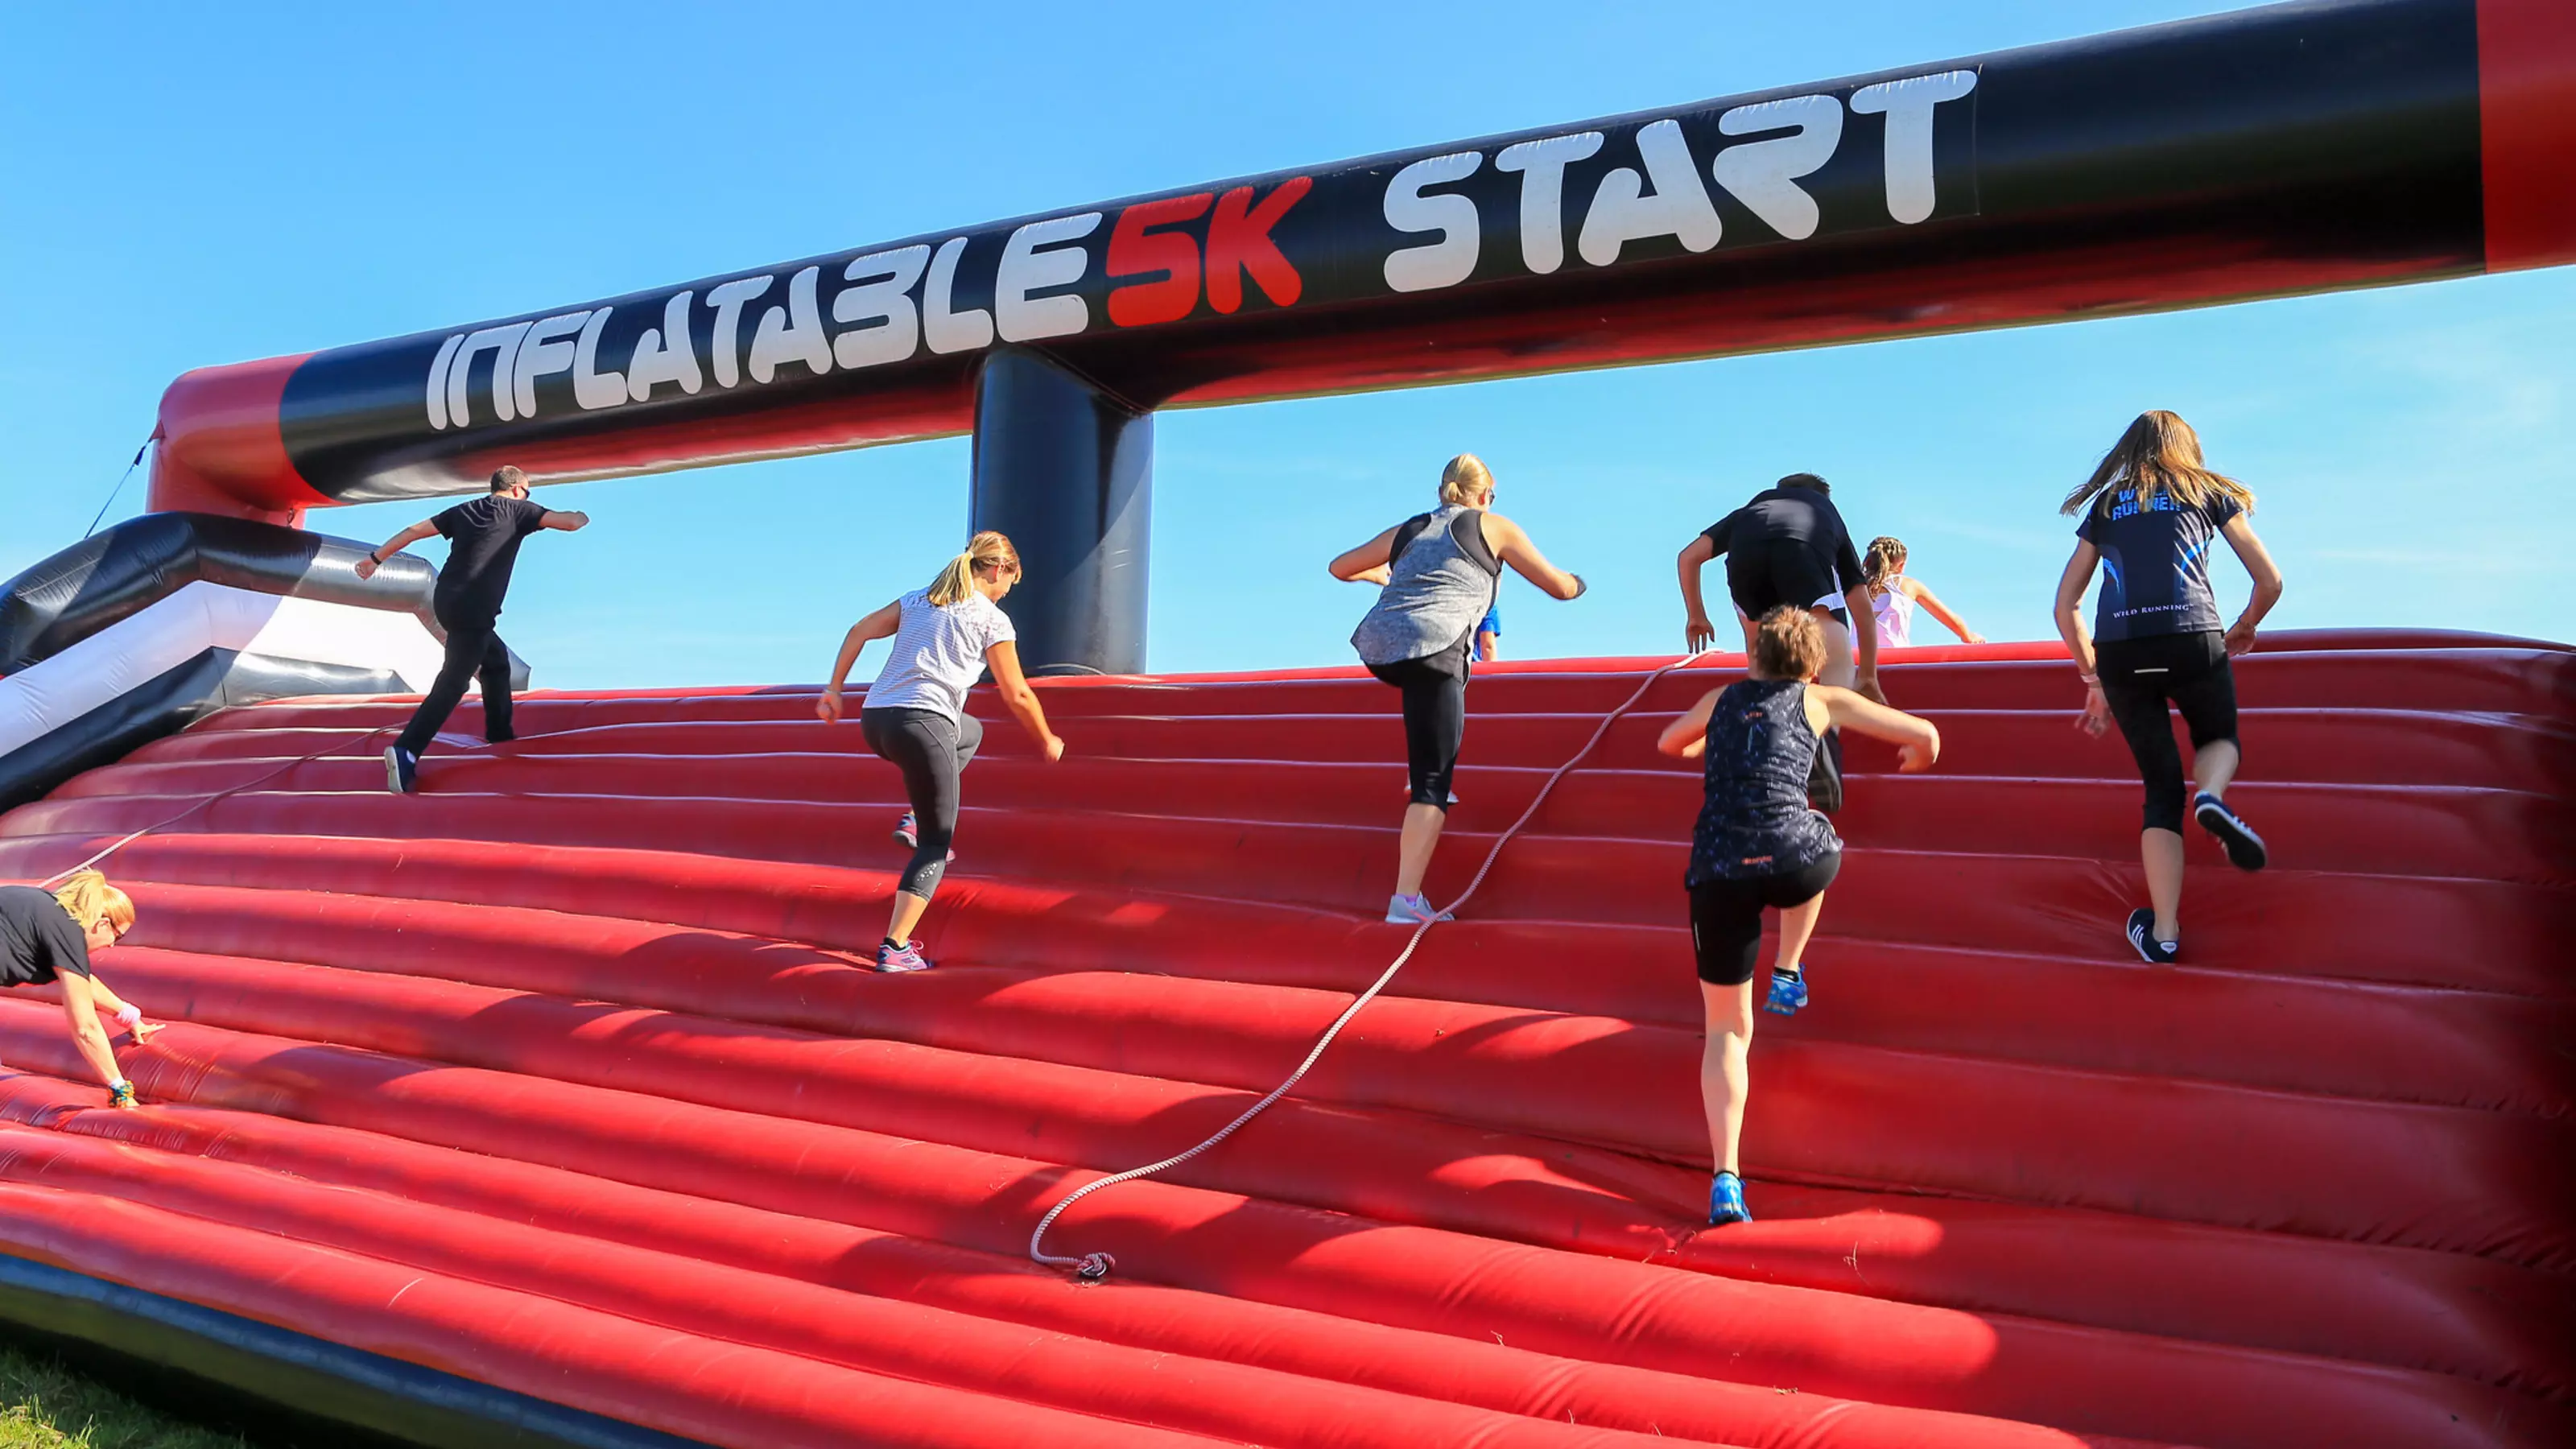 Inflatable 5k participants climb over an inflatable obstacle.